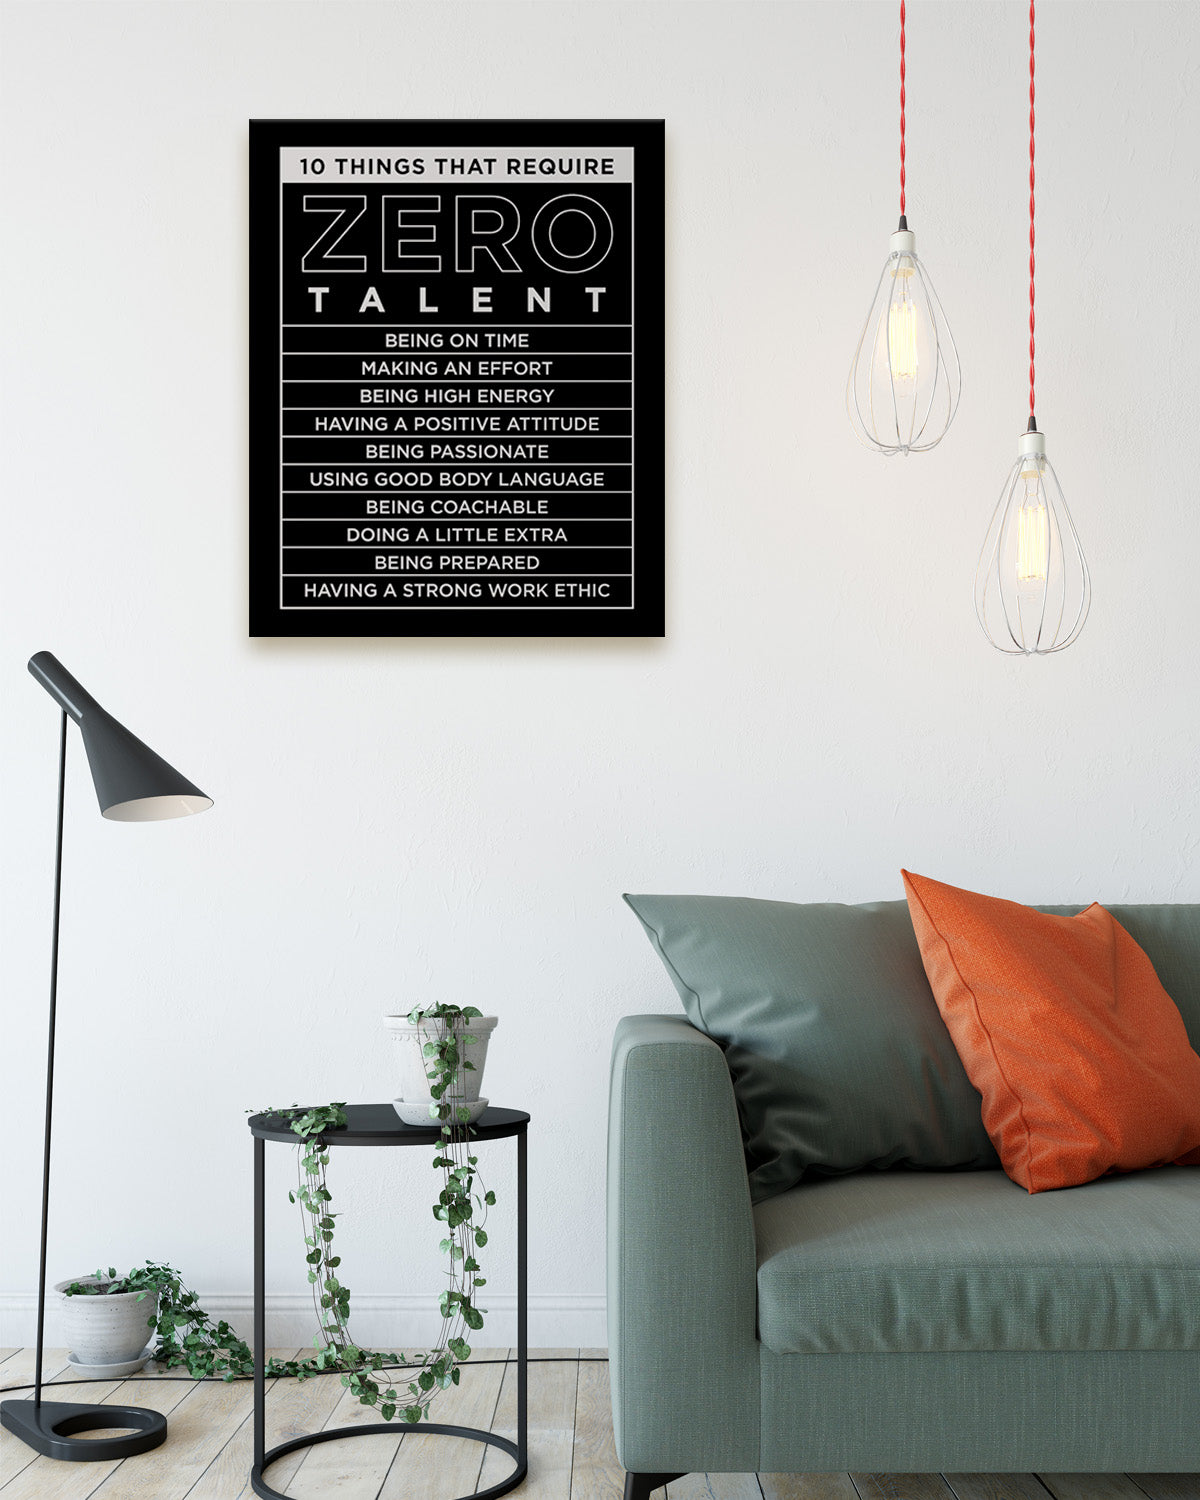 10 Things That Require Zero Talent Room Decor - Inspirational Wall Art - Motivational Wall Decor for Office Kitchen Bedroom Bathroom - Gift for Women Men Mentor Teens